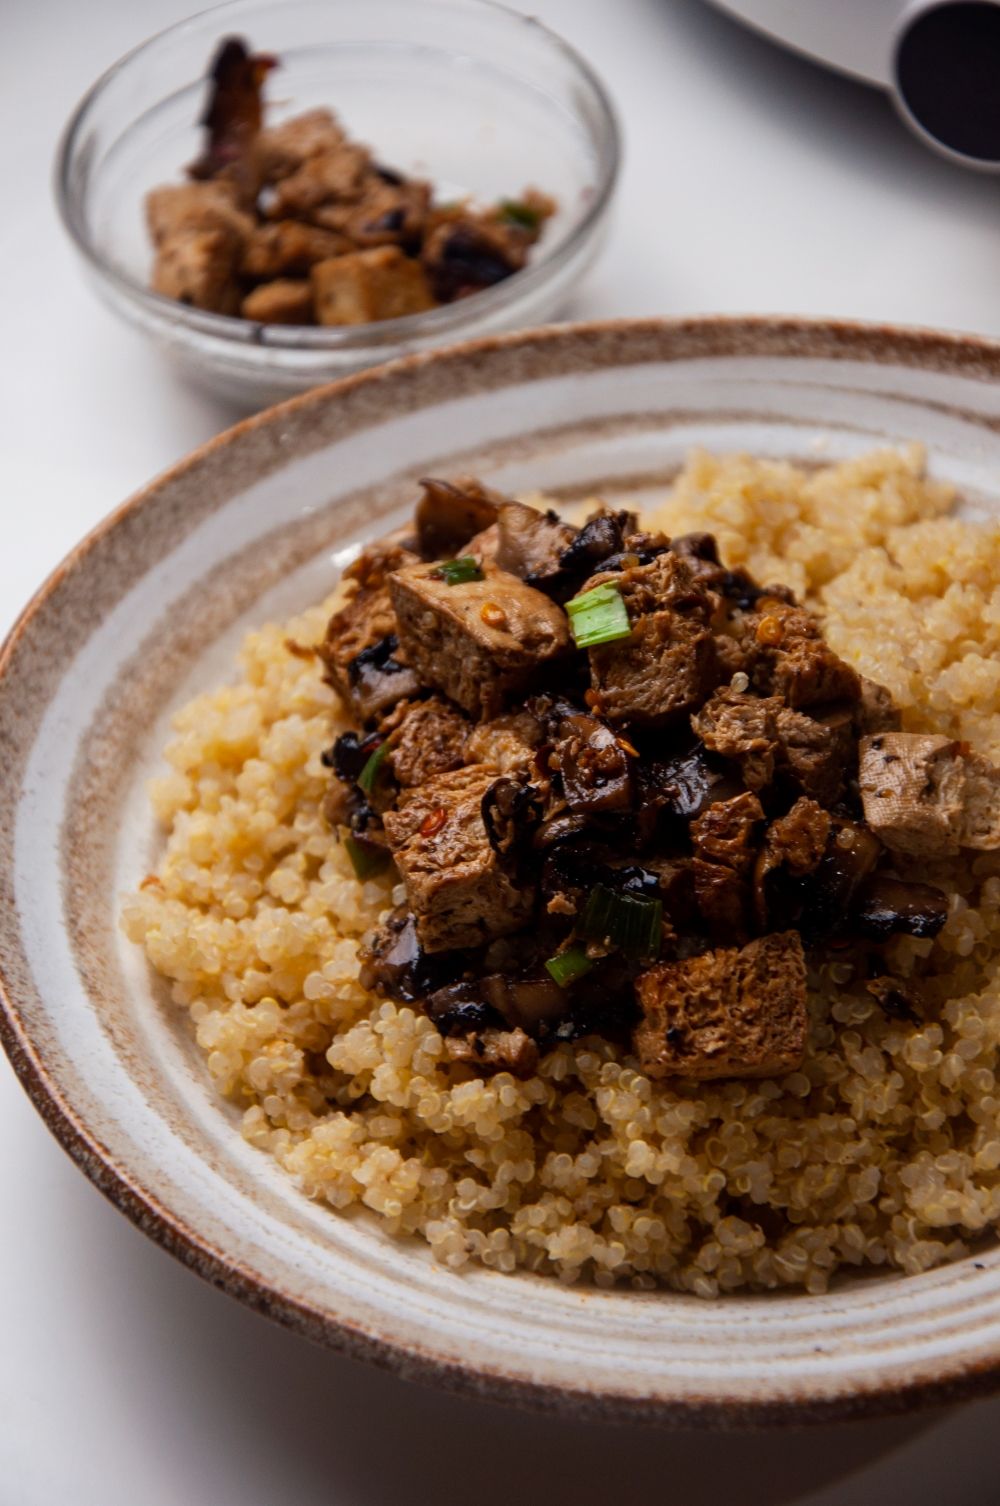 Putting a bed of quinoa with sautéed tofu and mushrooms.